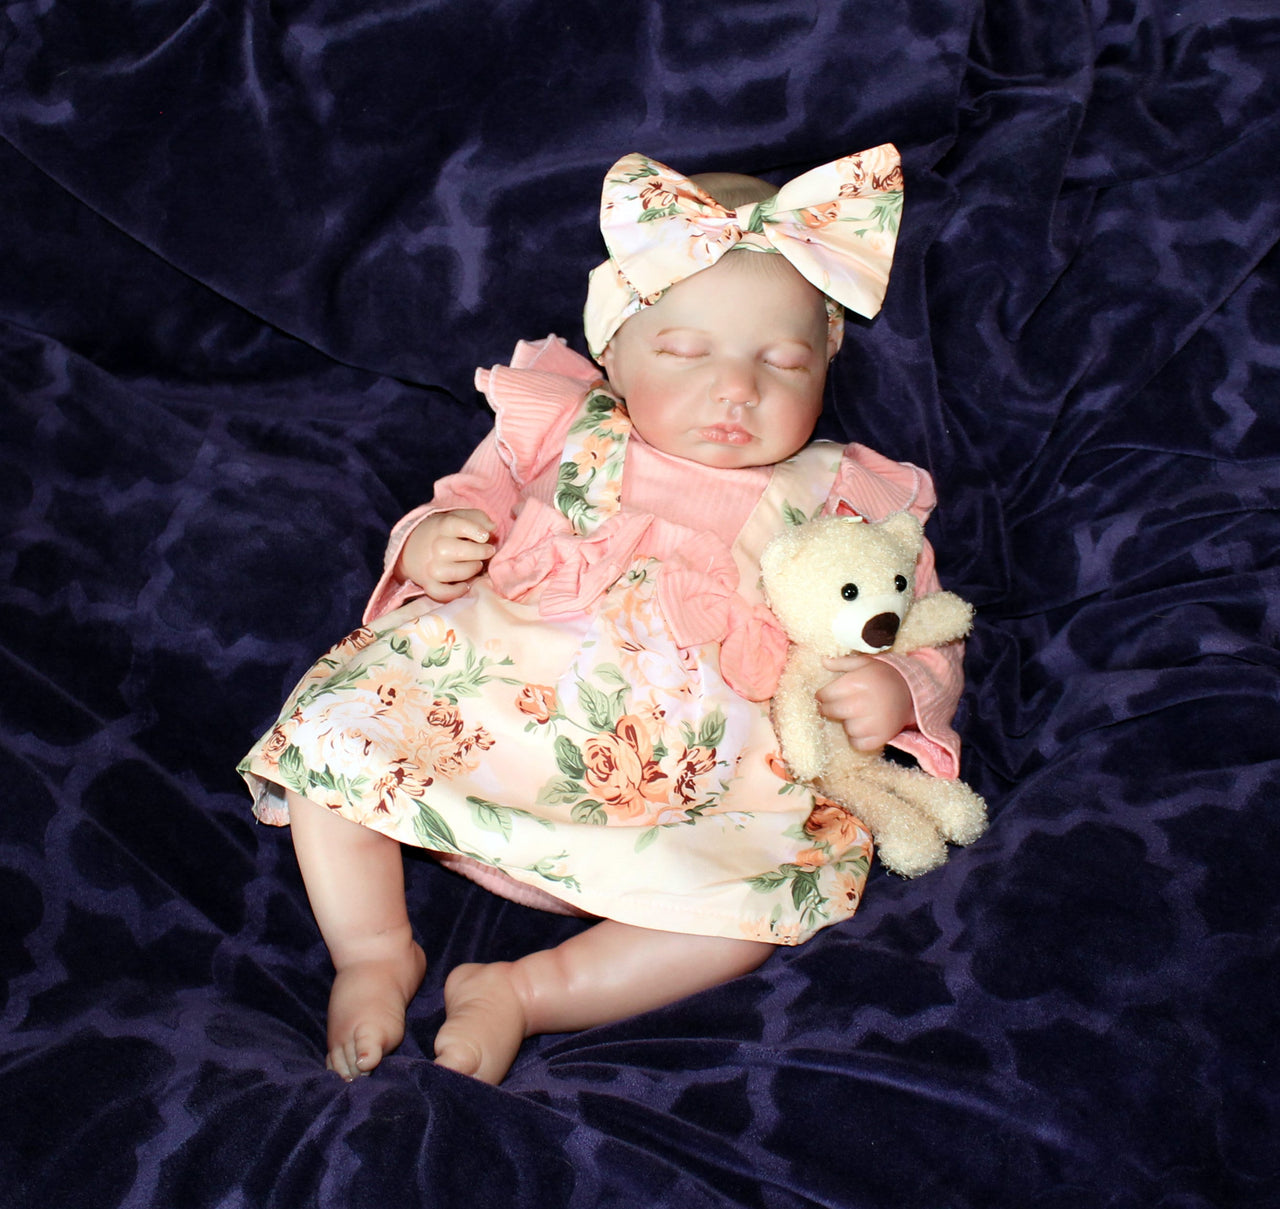 Painted Finished Reborn 2 to 8 Pounds Lifelike Baby Doll 20” Weighted Newborn Baby Heavy Dolls For Children Child Friendly Gifts For Girls